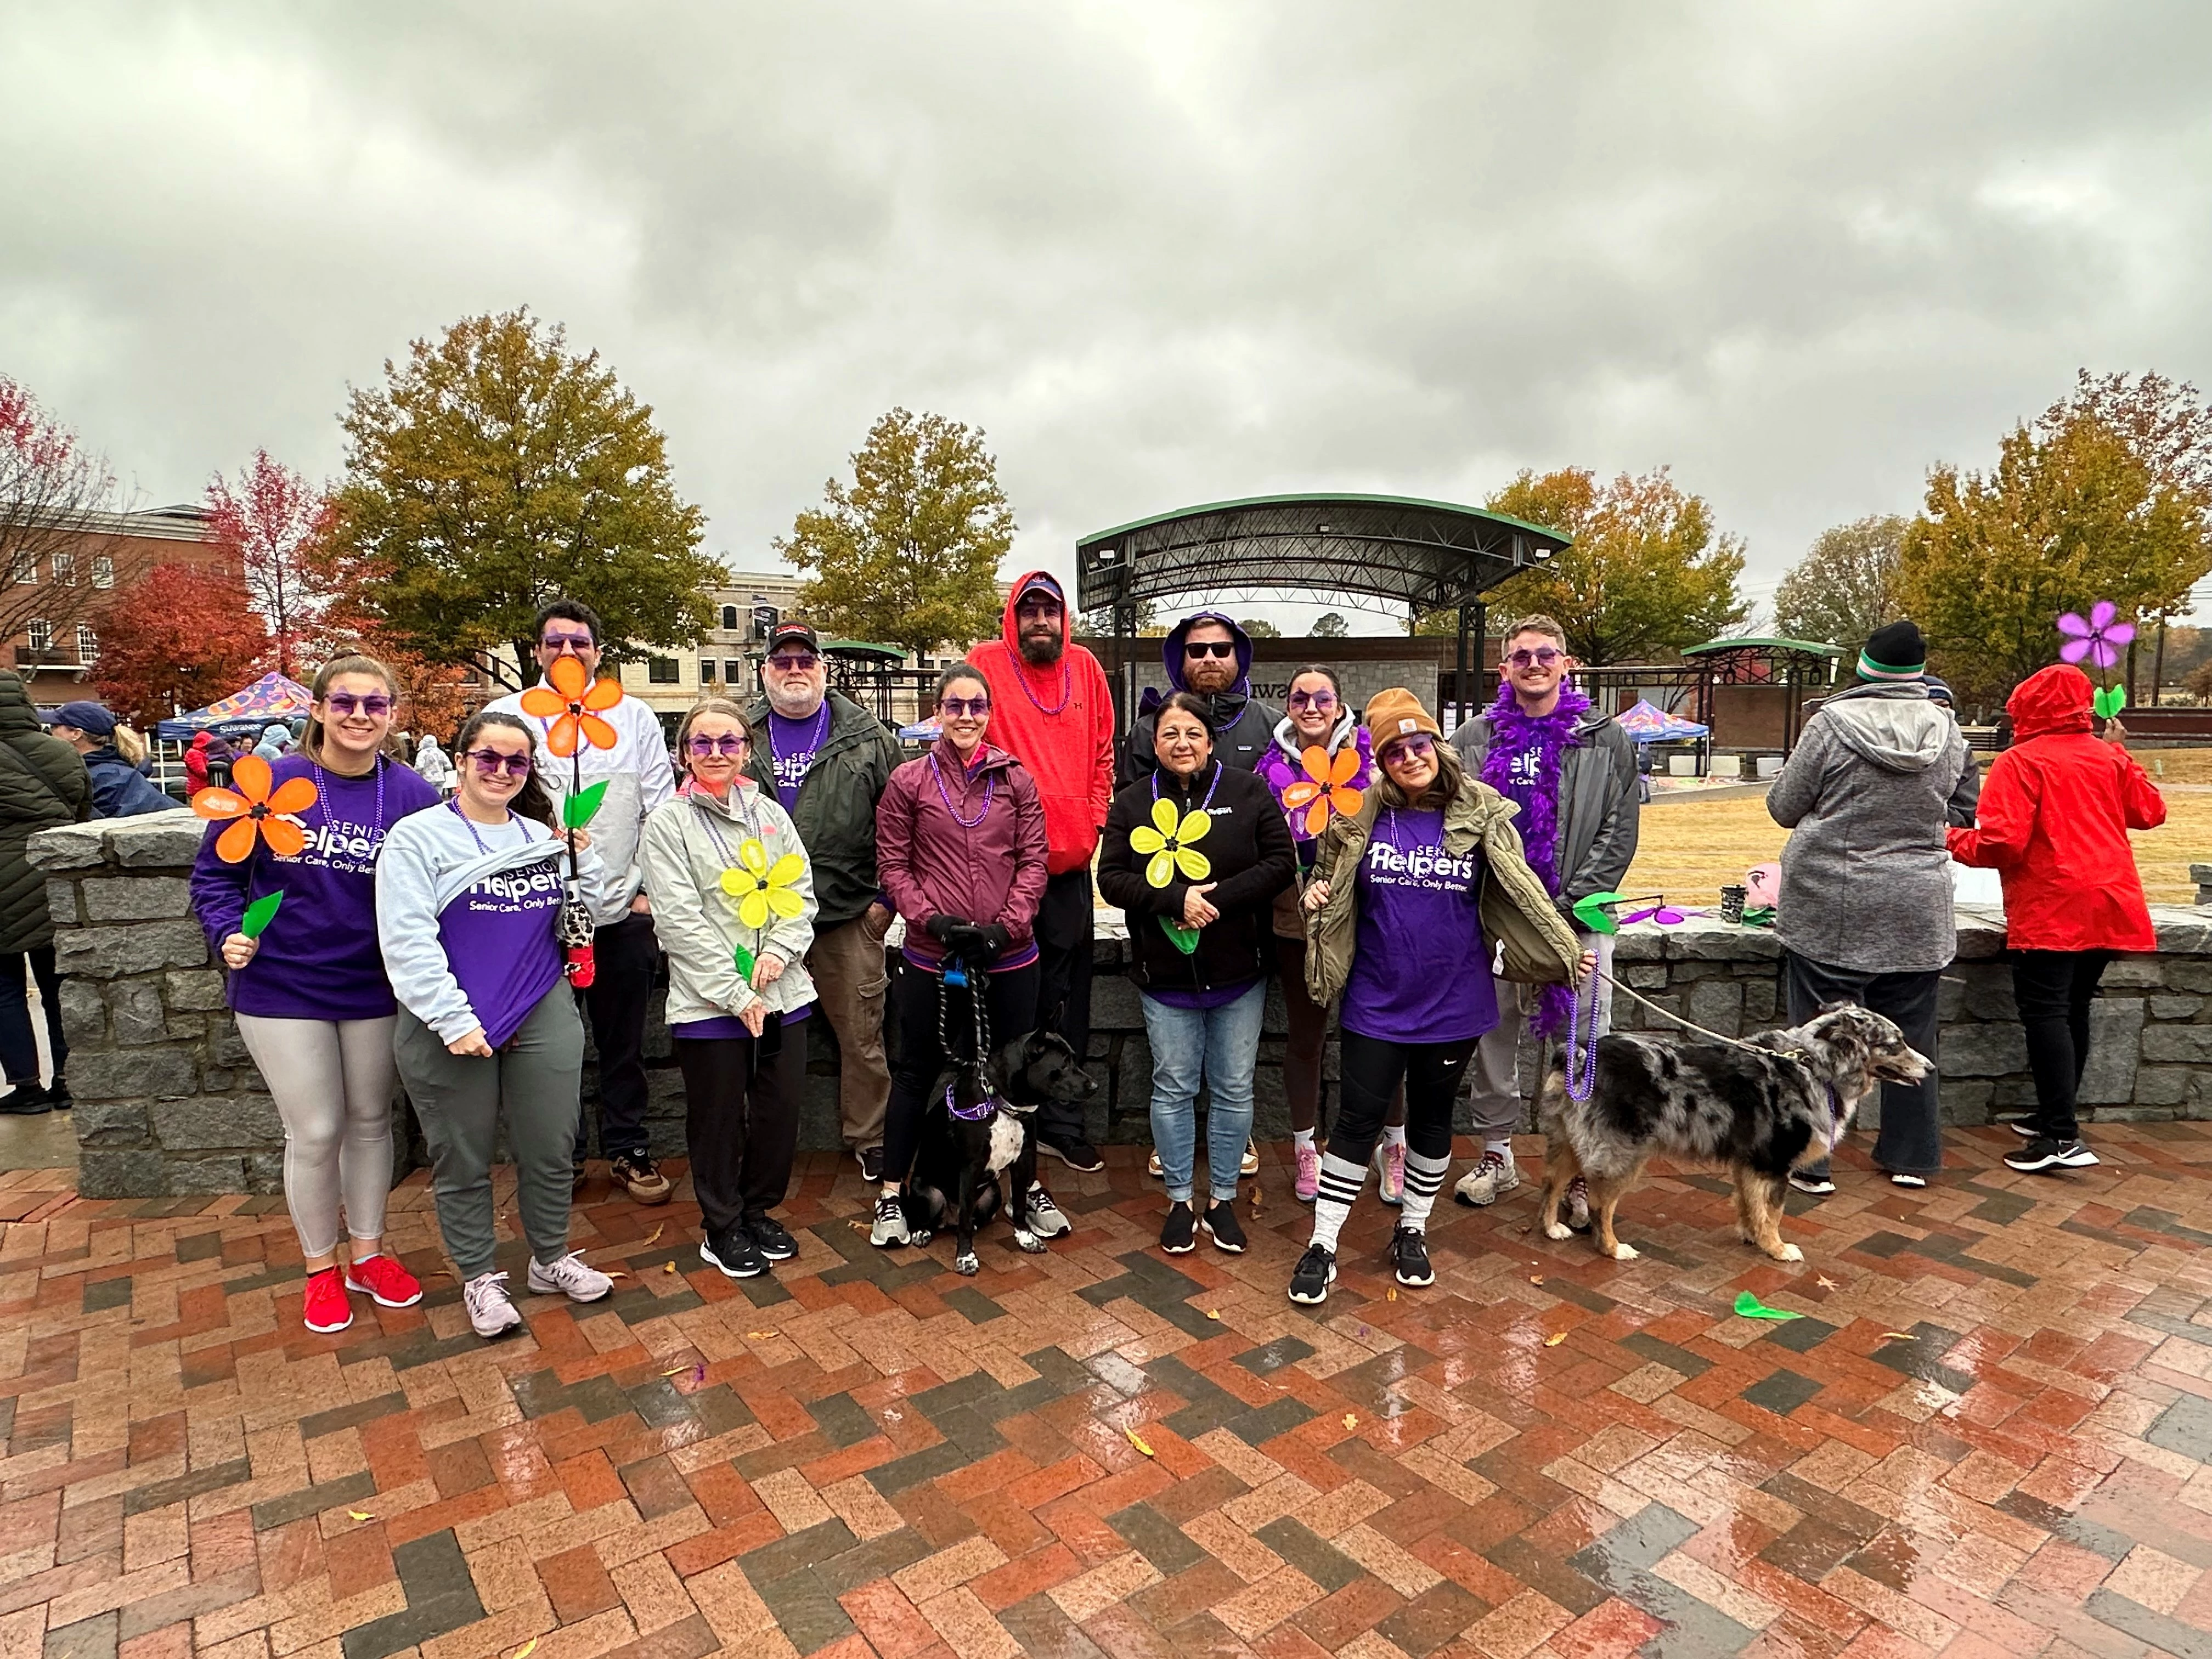 Senior Helpers of Lawrenceville unites for the Walk to End Alzheimer's! Together, we stride towards a brighter future, raising awareness and funds to combat Alzheimer's Disease.